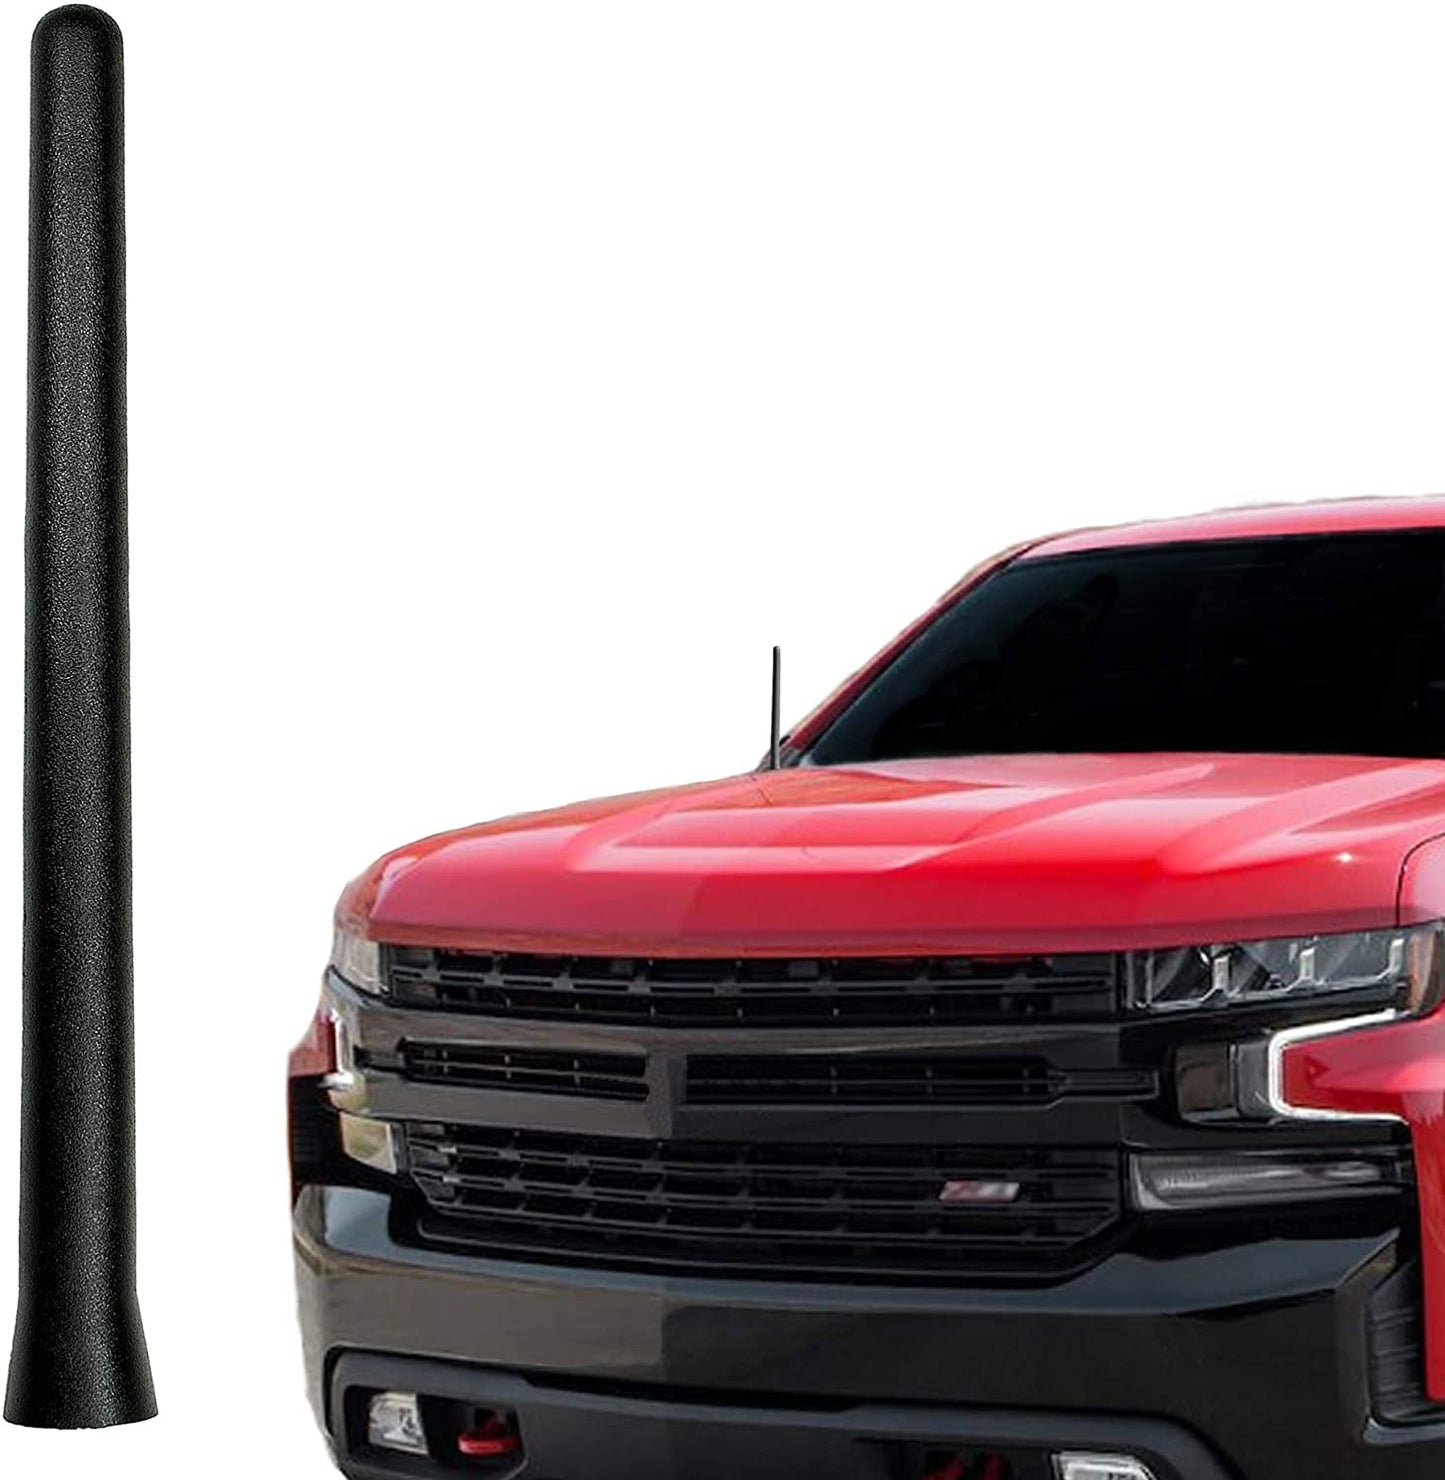 AntennaMastsRus - The Original 6 3/4 Inch is Compatible with Chevrolet Silverado 1500 (2006-2022) - Car Wash Proof Short Rubber Antenna - Internal Copper Coil - Premium Reception - German Engineered - (For 1 piece(s))